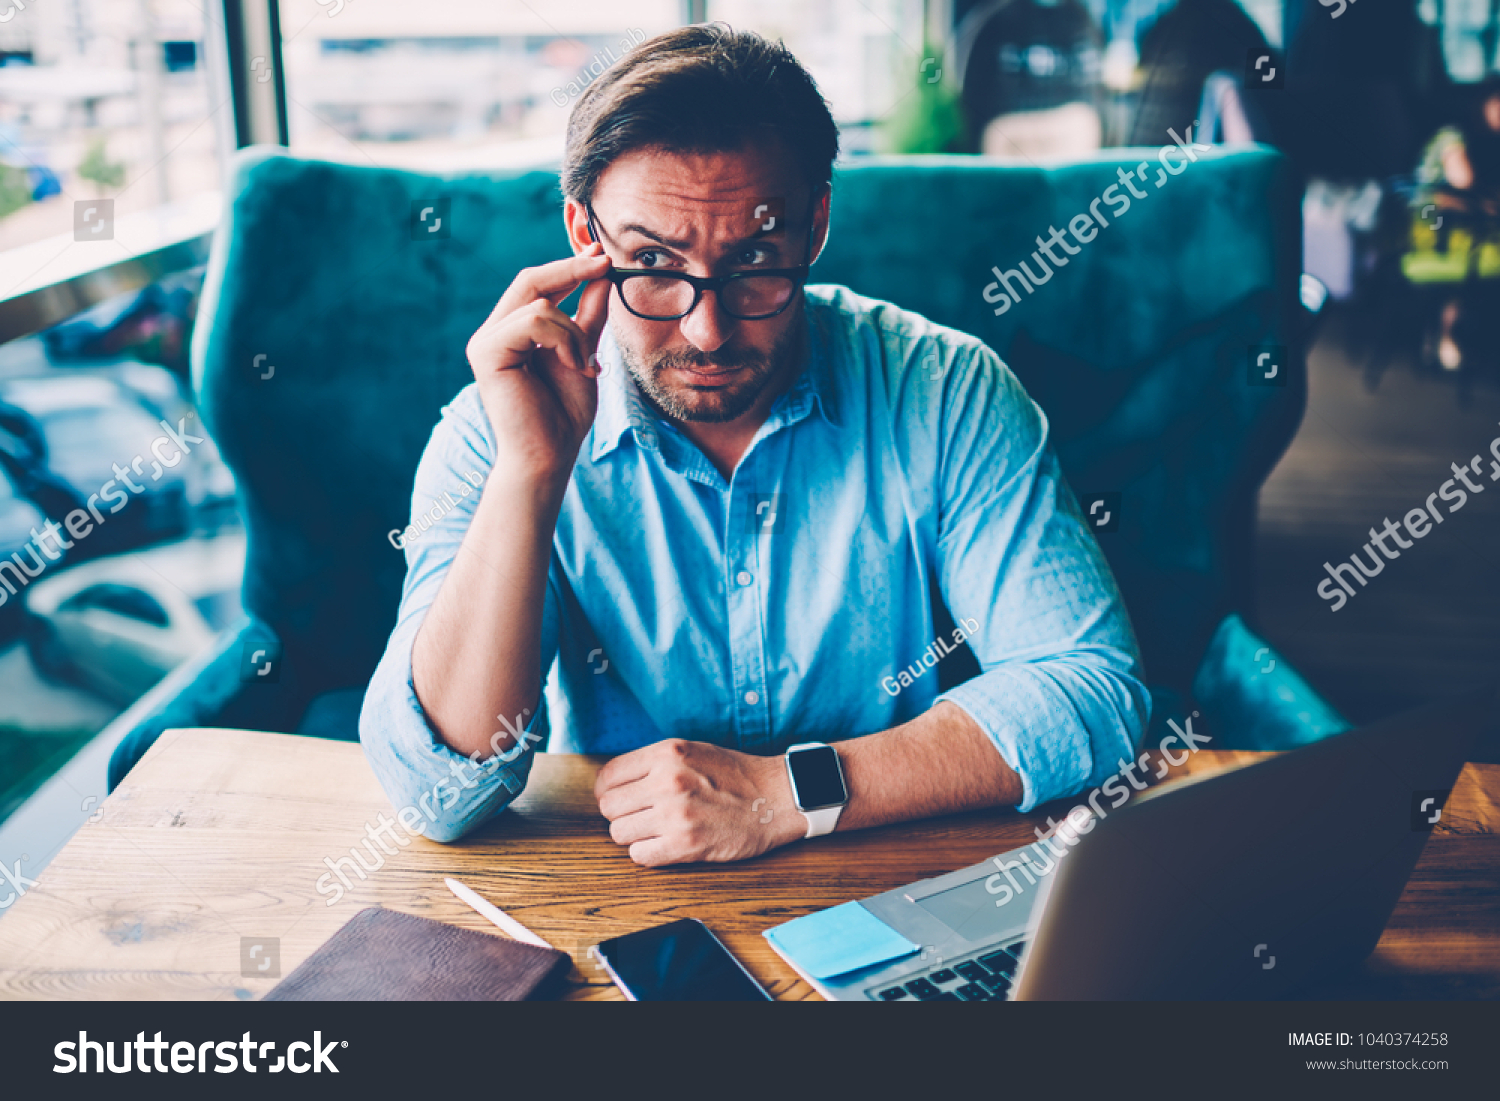 Bearded entrepreneur dressed in blue shirt fixing optical eyeglasses with black frame while looking away sitting at wooden desktop with digital laptop computer connected to wireless internet #1040374258